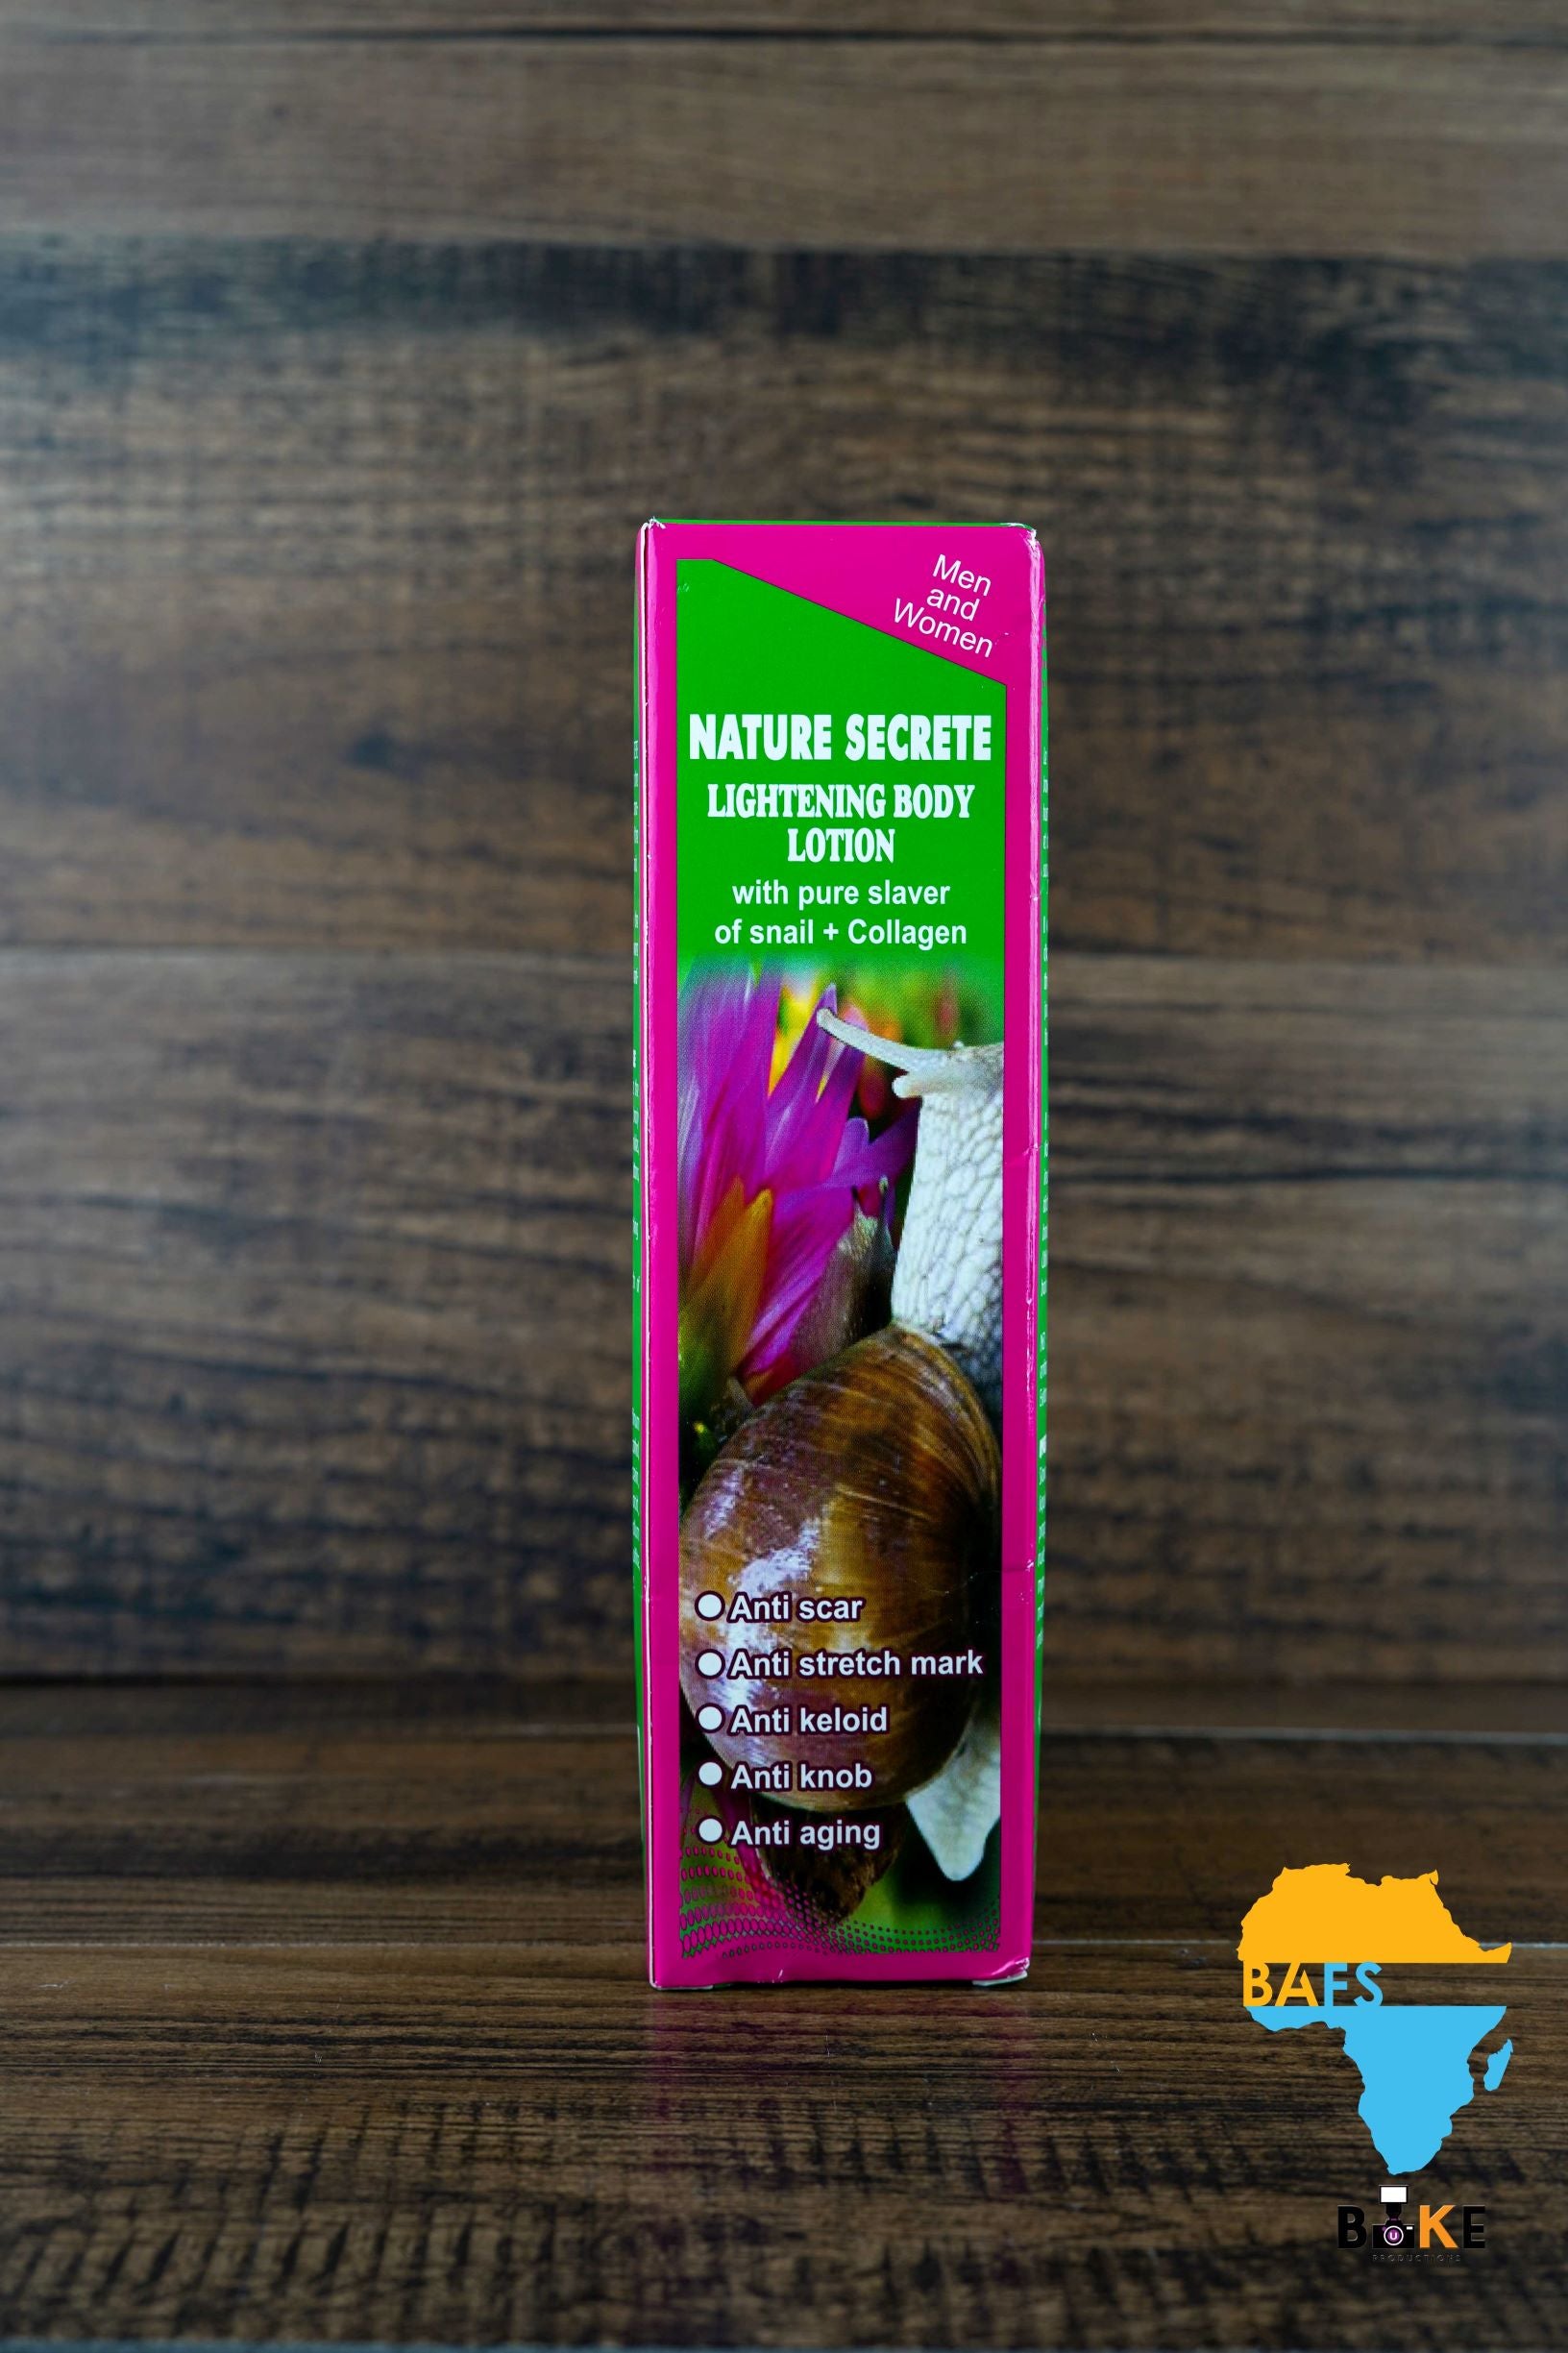 Nature Secrete Lightening Body Lotion with Pure Slaver of Snail + Collagen